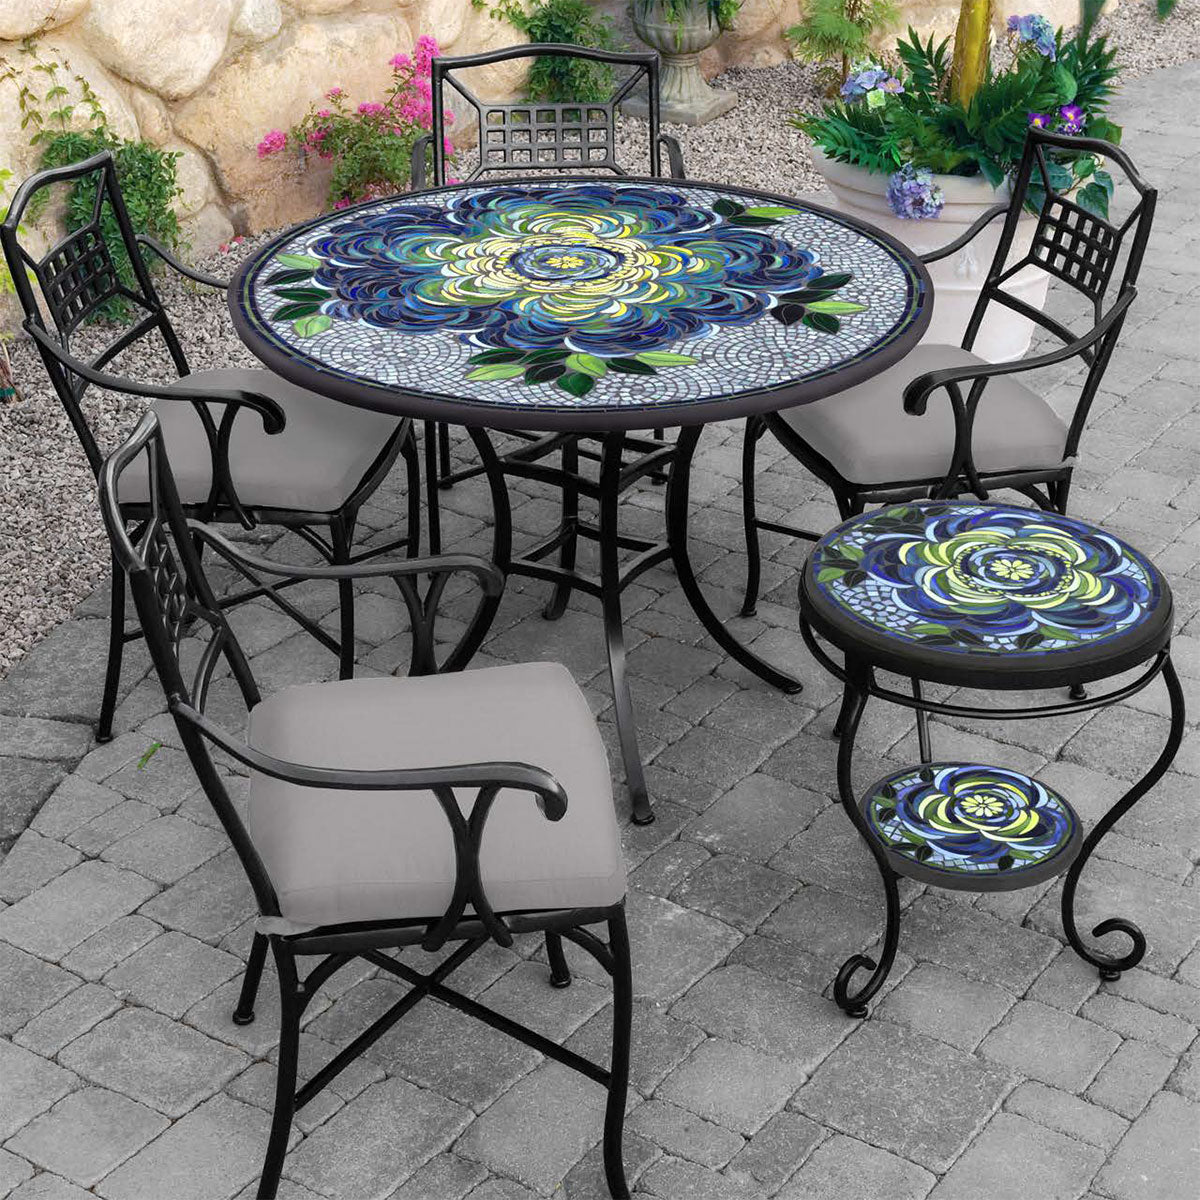 48" Mosaic Patio Tables